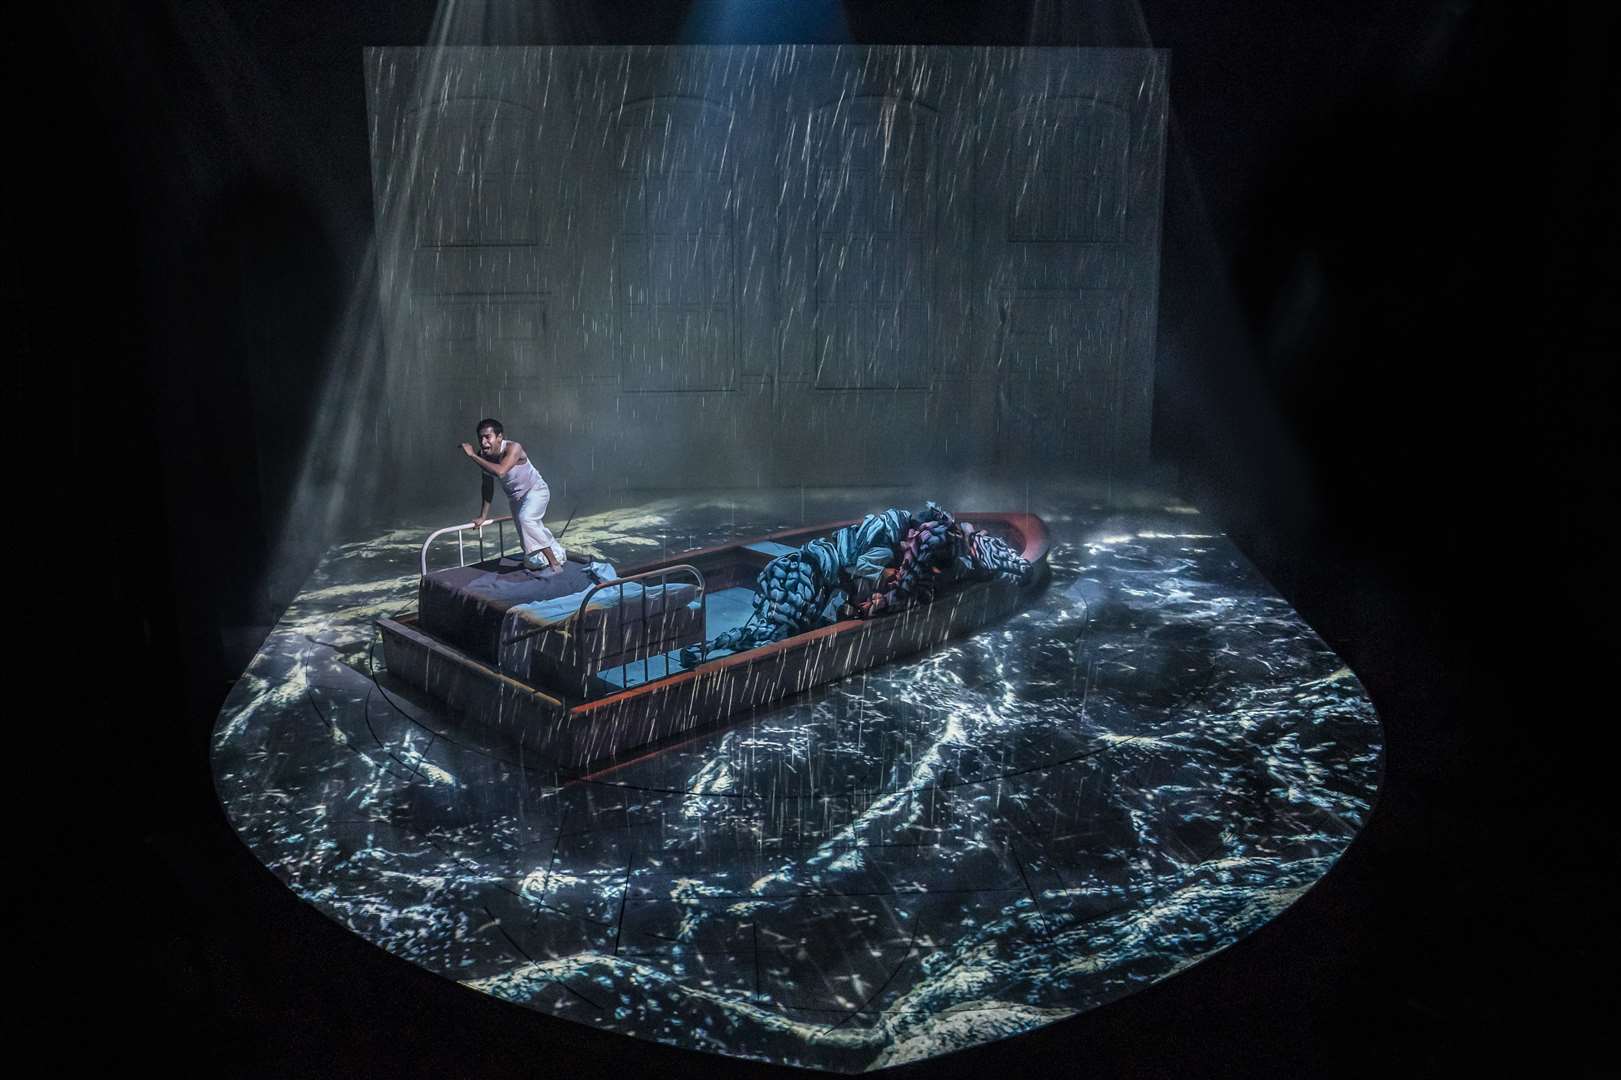 Life of Pi is being performed at His Majesty's Theatre in Aberdeen.